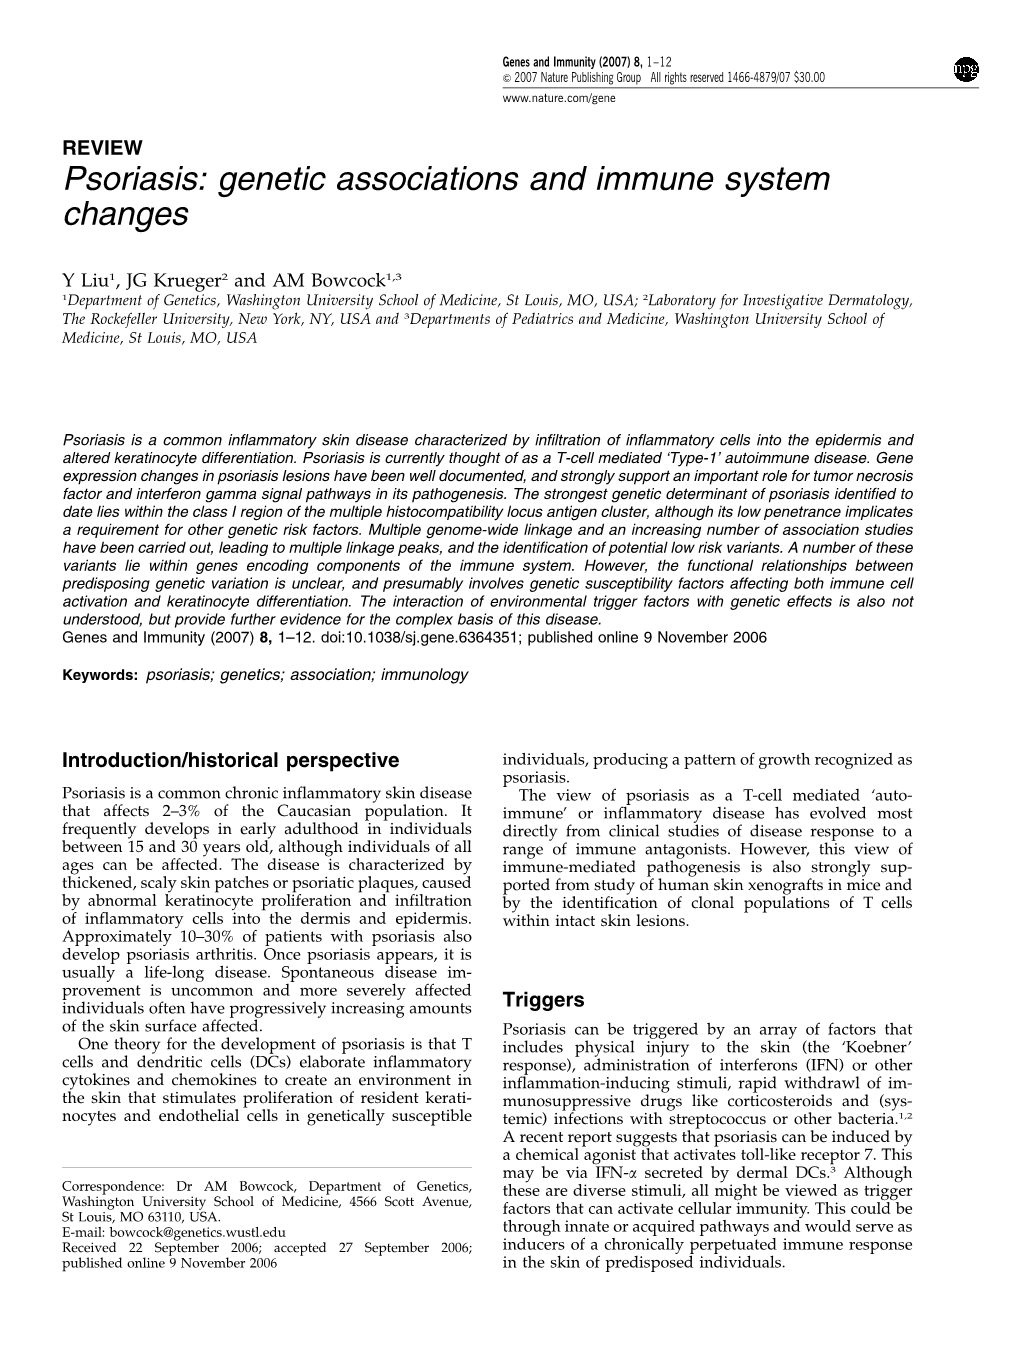 Psoriasis: Genetic Associations and Immune System Changes